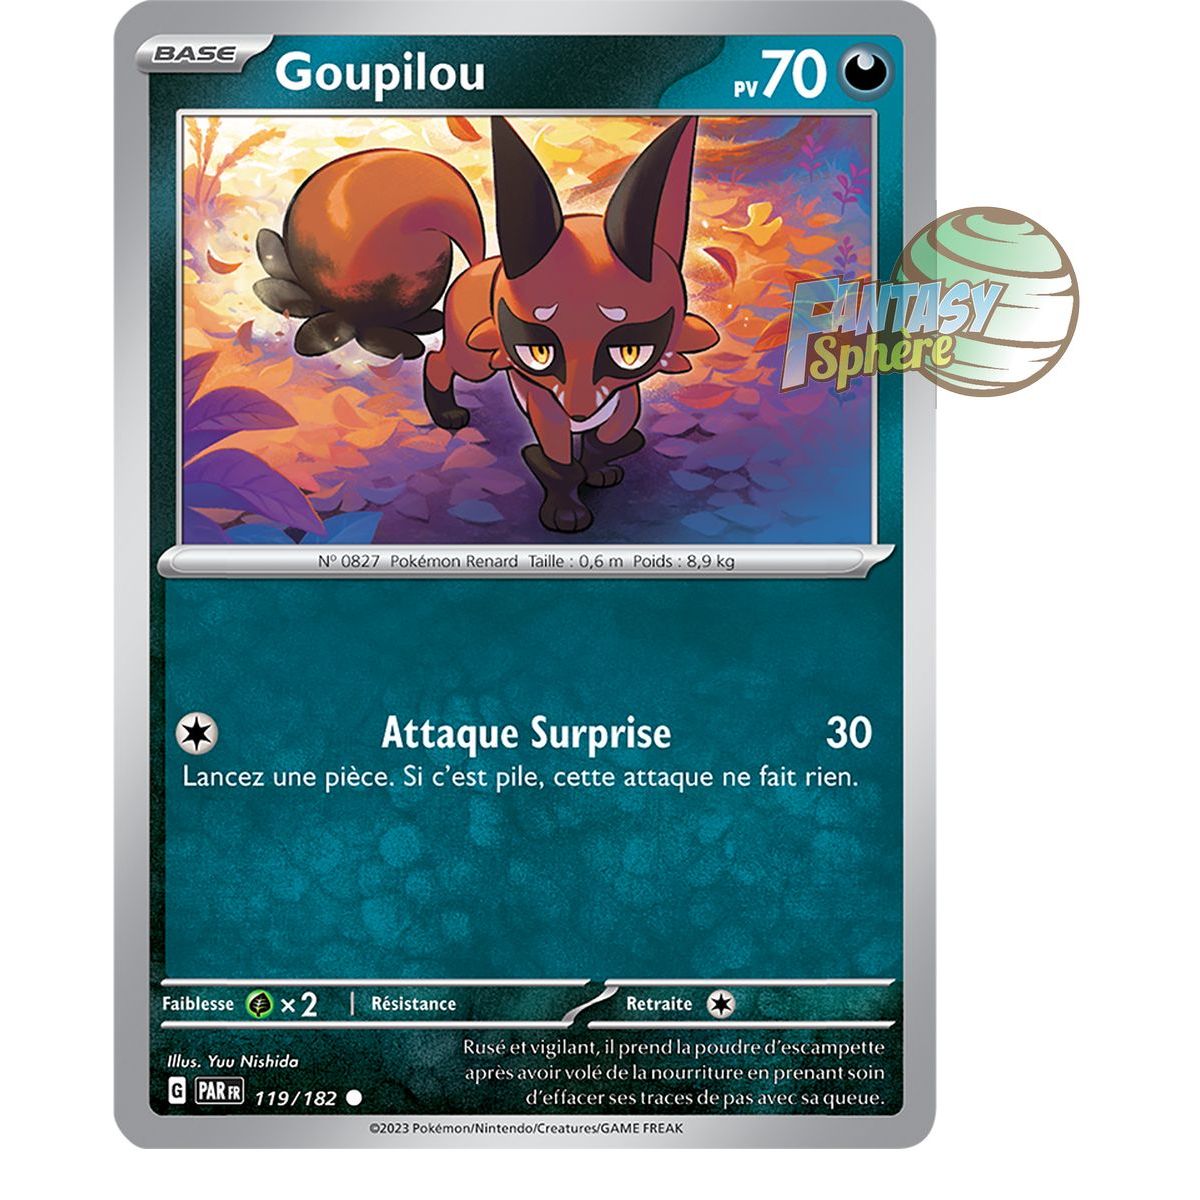 Goupilou - Municipality 119/182 - Scarlet and Violet Faille Paradox